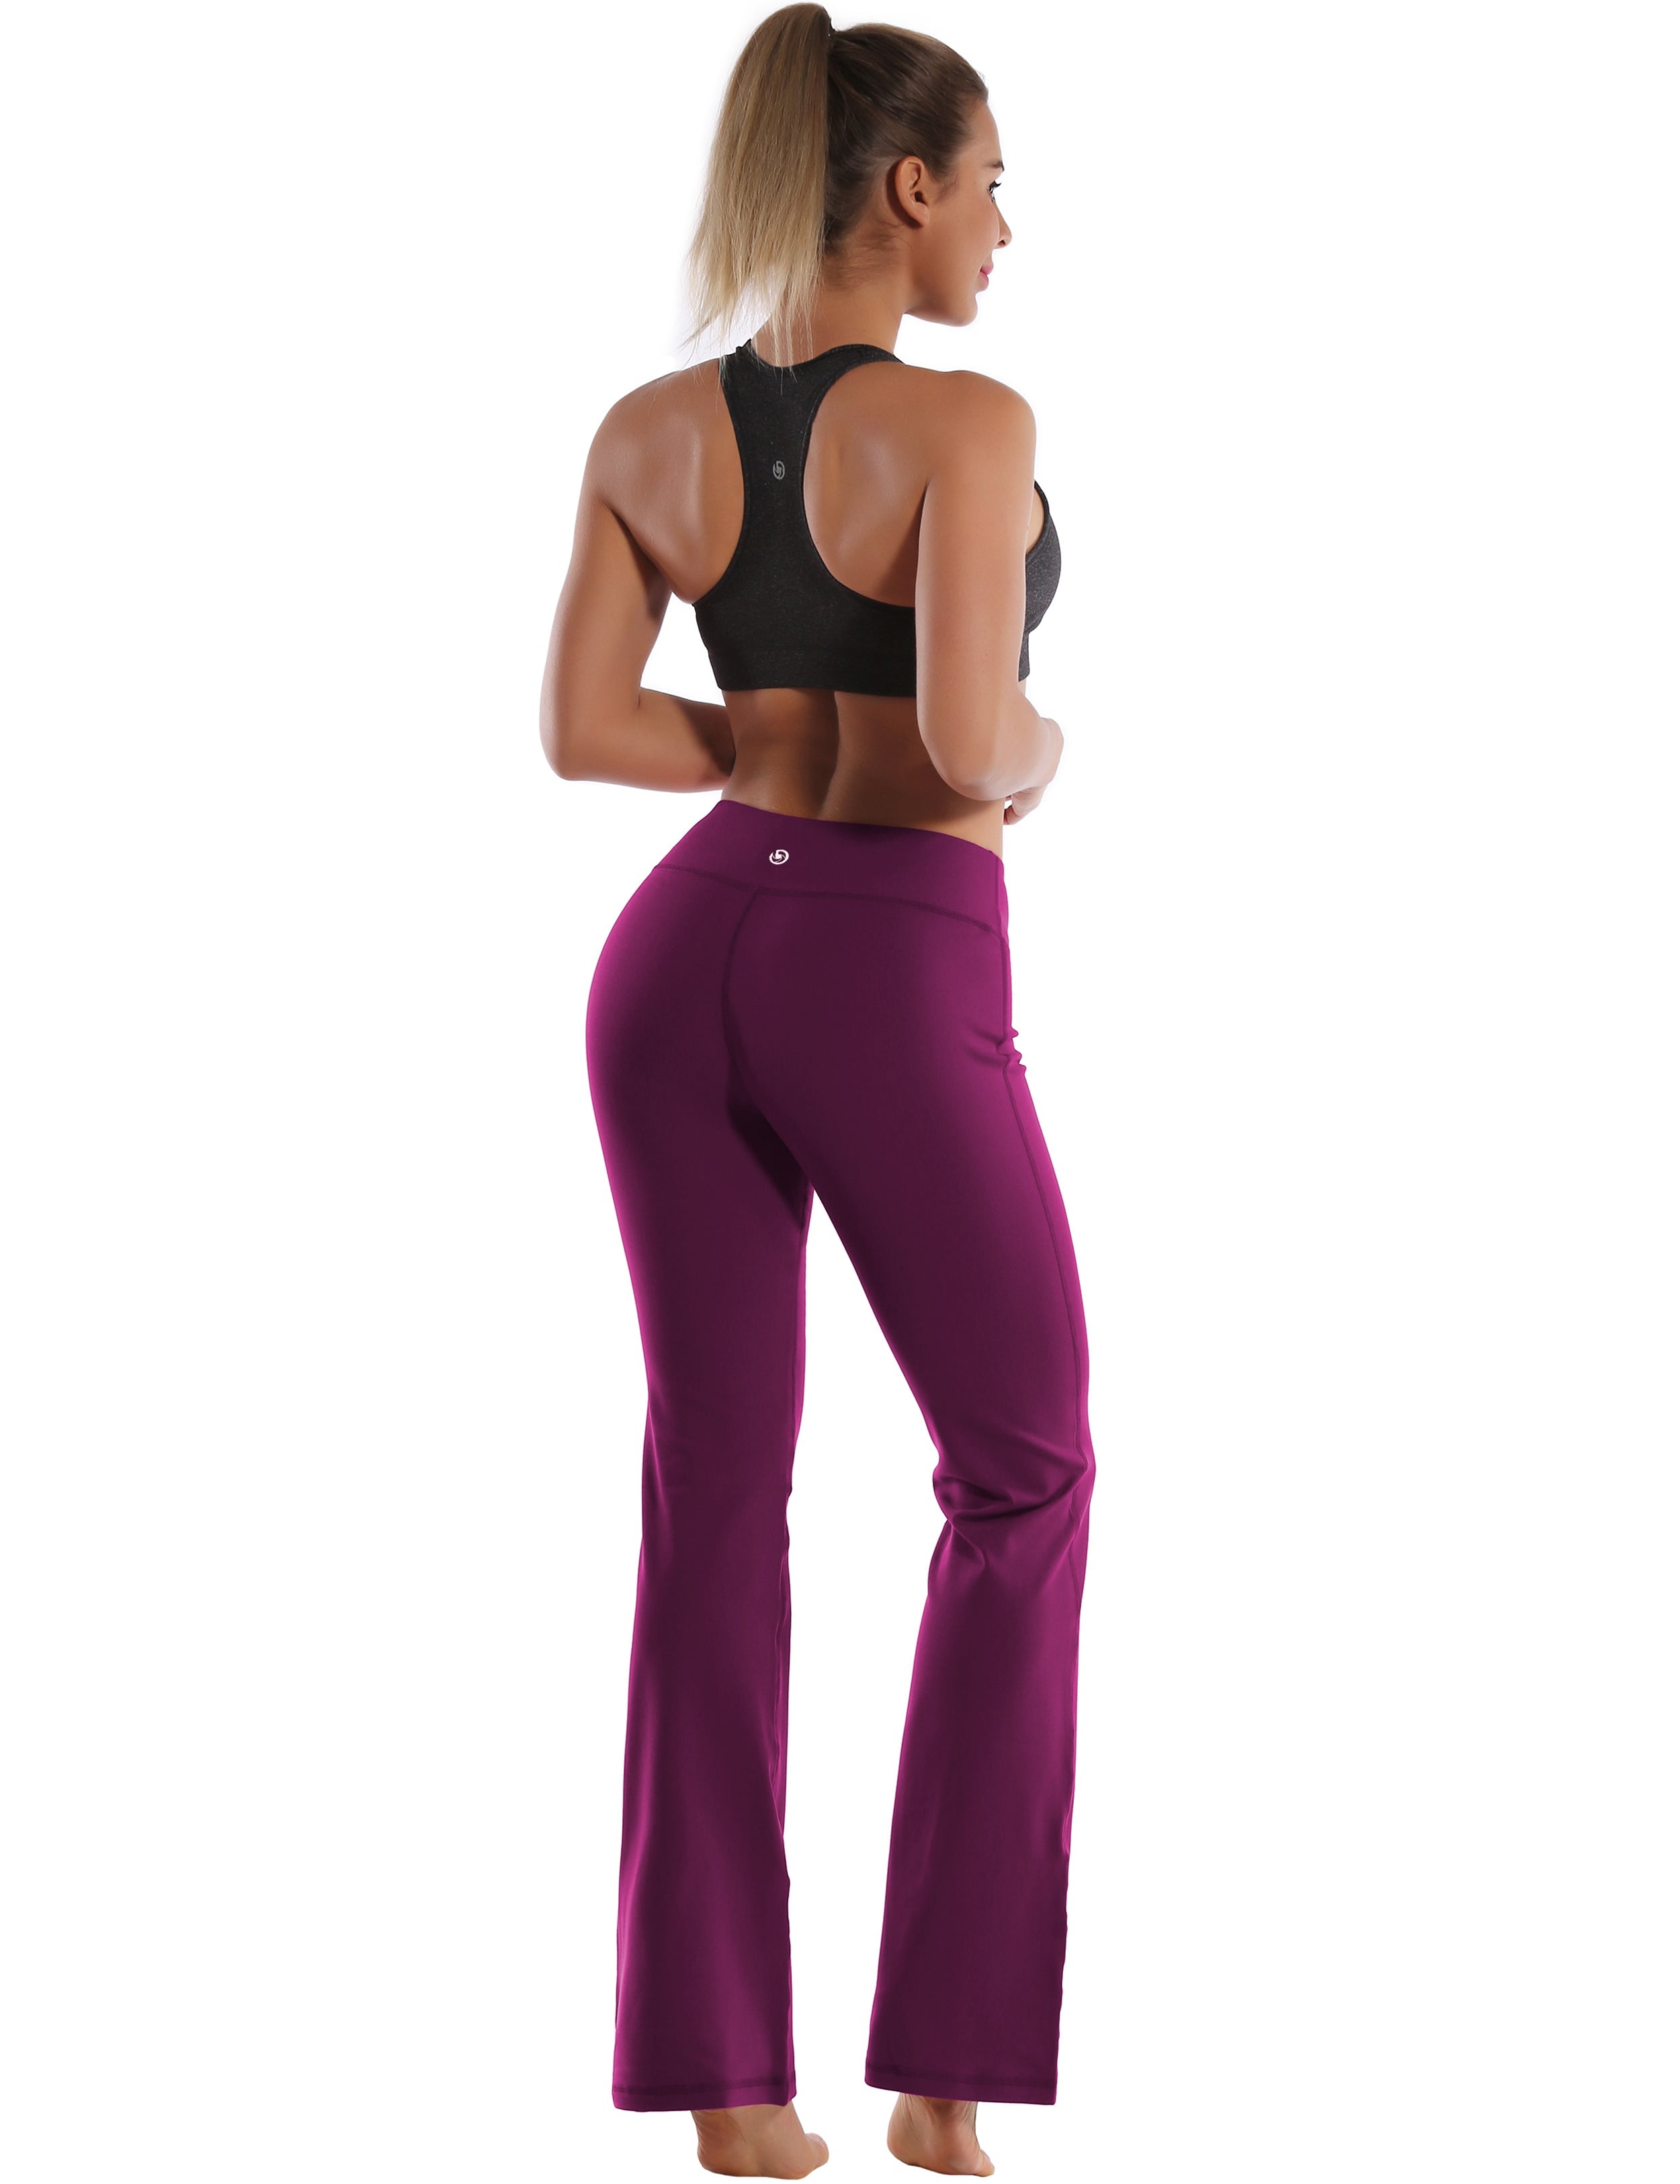 Cotton Nylon Bootcut Leggings plum 87%Nylon/13%Spandex (Super soft, cotton feel , 280gsm) Fabric doesn't attract lint easily 4-way stretch No see-through Moisture-wicking Inner pocket Four lengths